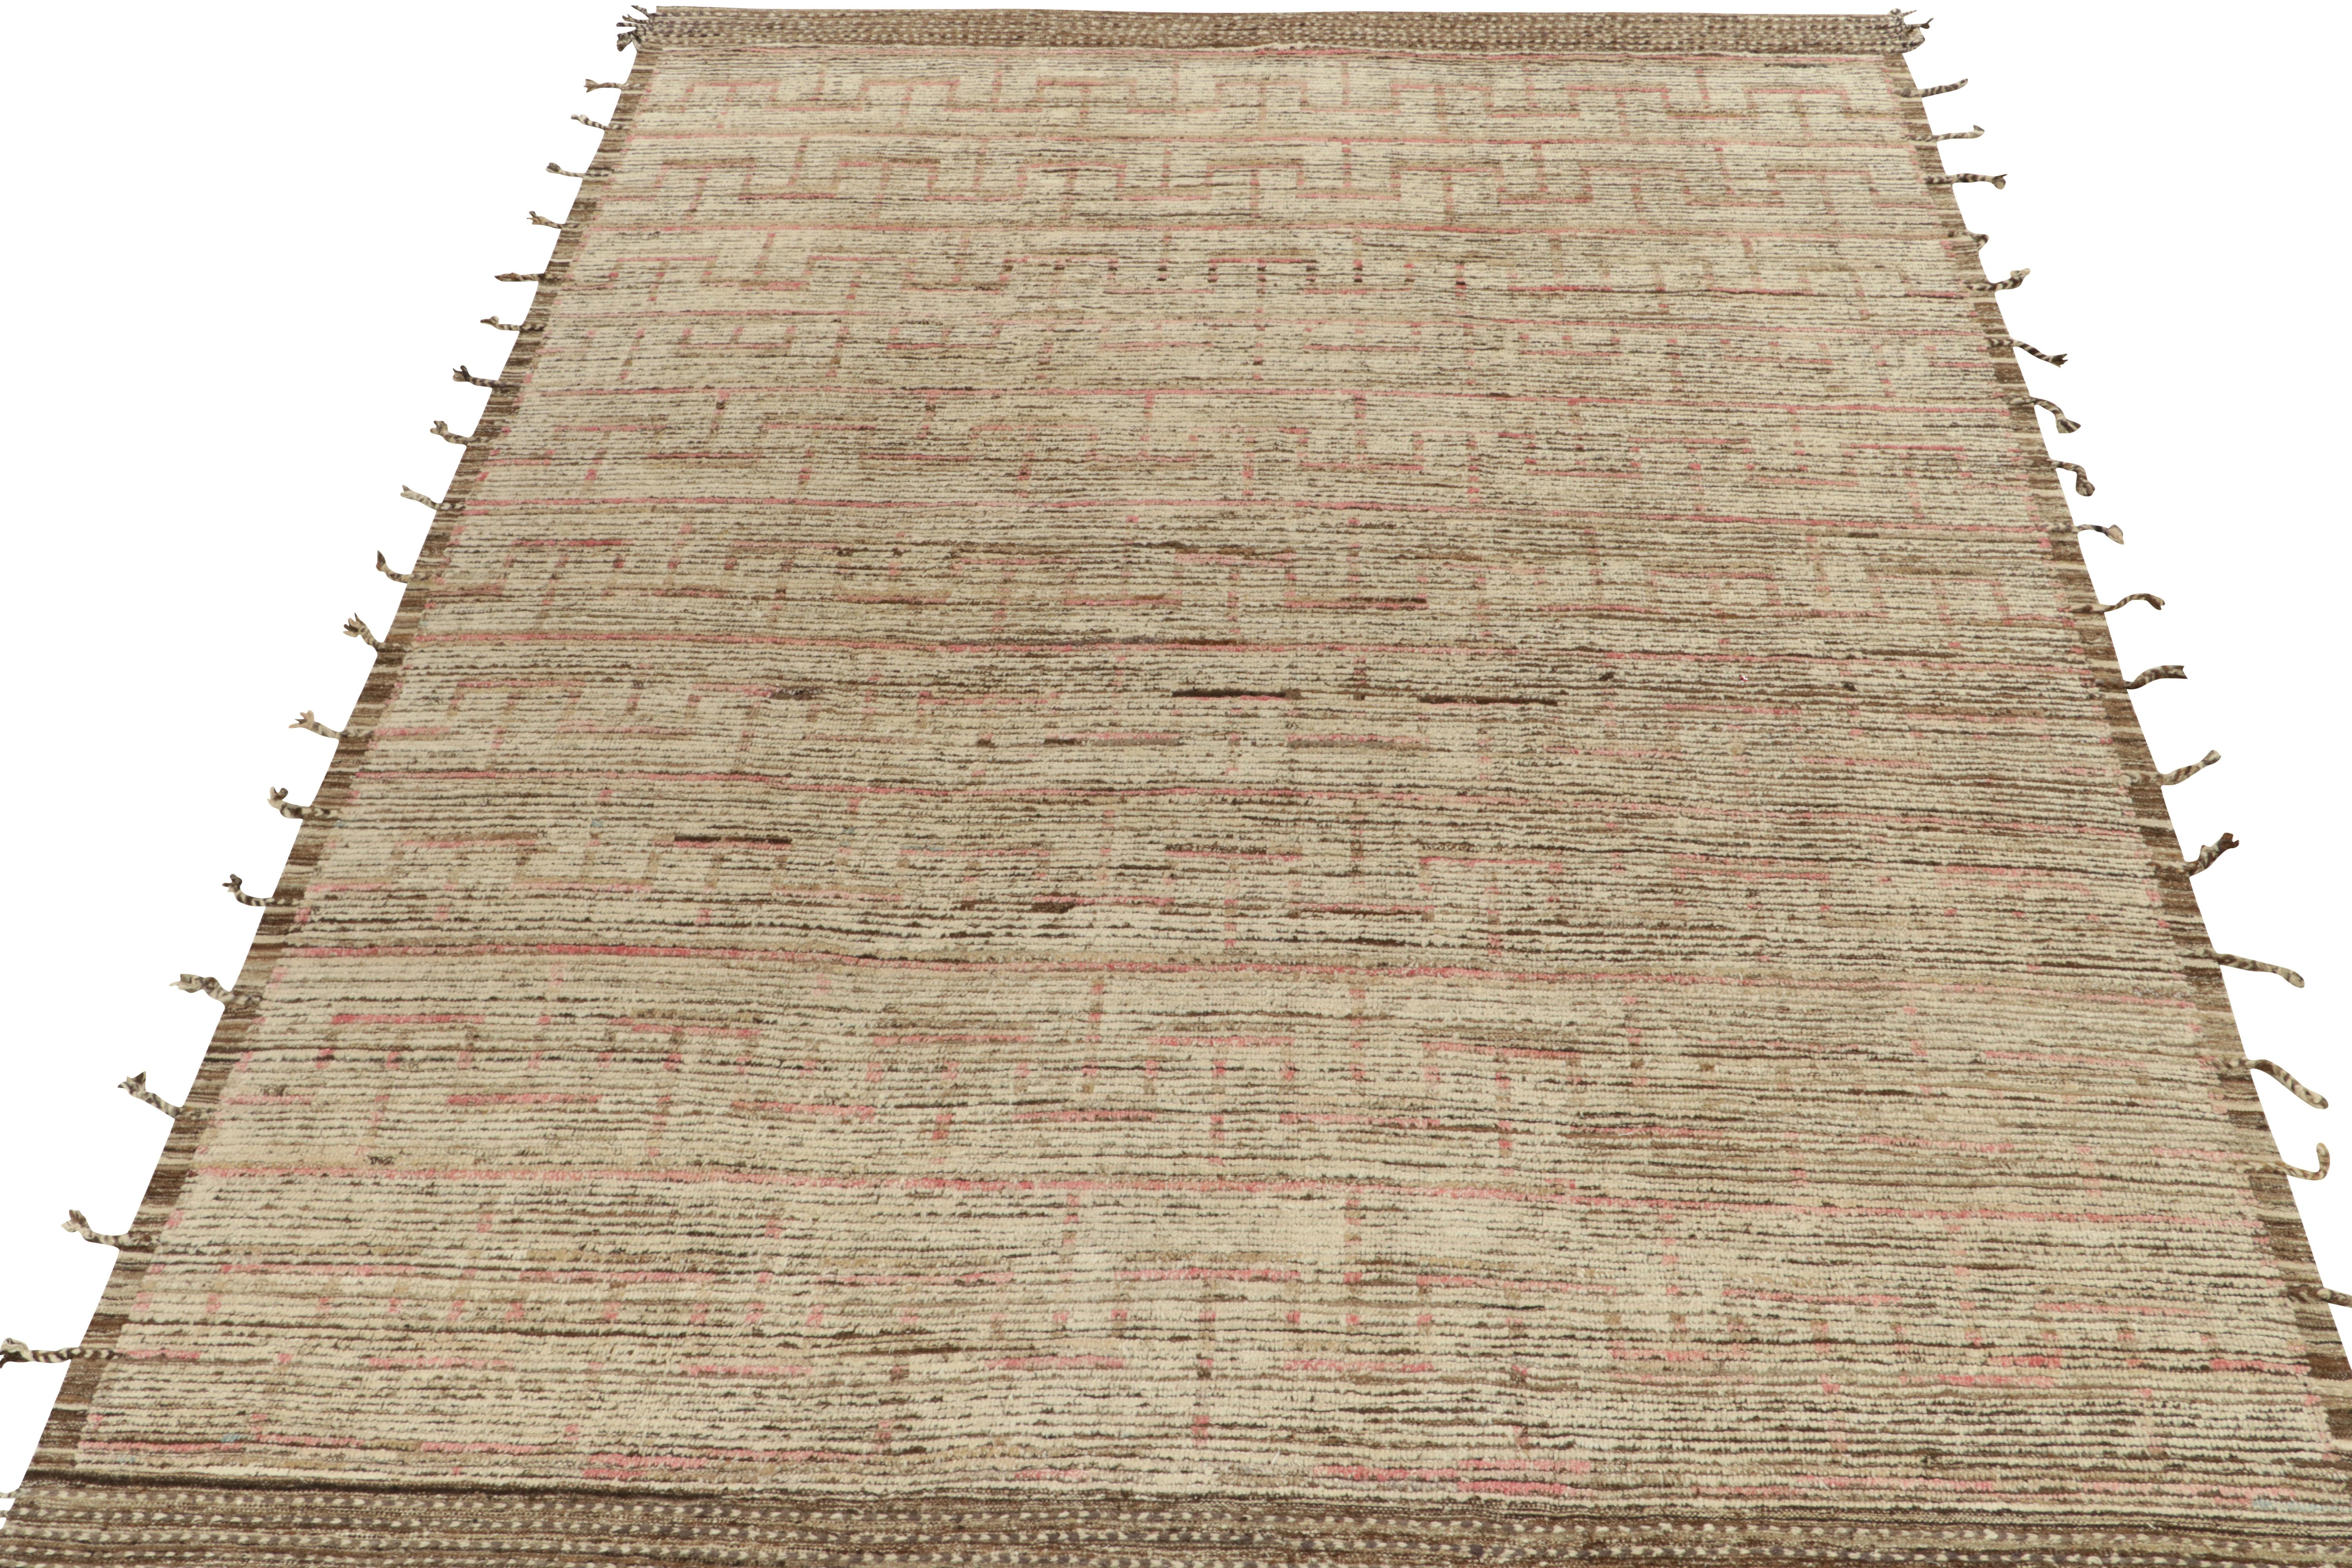 Rug & Kilim draws an alluring spin on Moroccan style with this 9x13 hand-knotted piece. The gracious piece enjoys a comfortable high low appeal in creamy white, brown & pink tones concluding to fringes on the borders for amplified dimensionality to